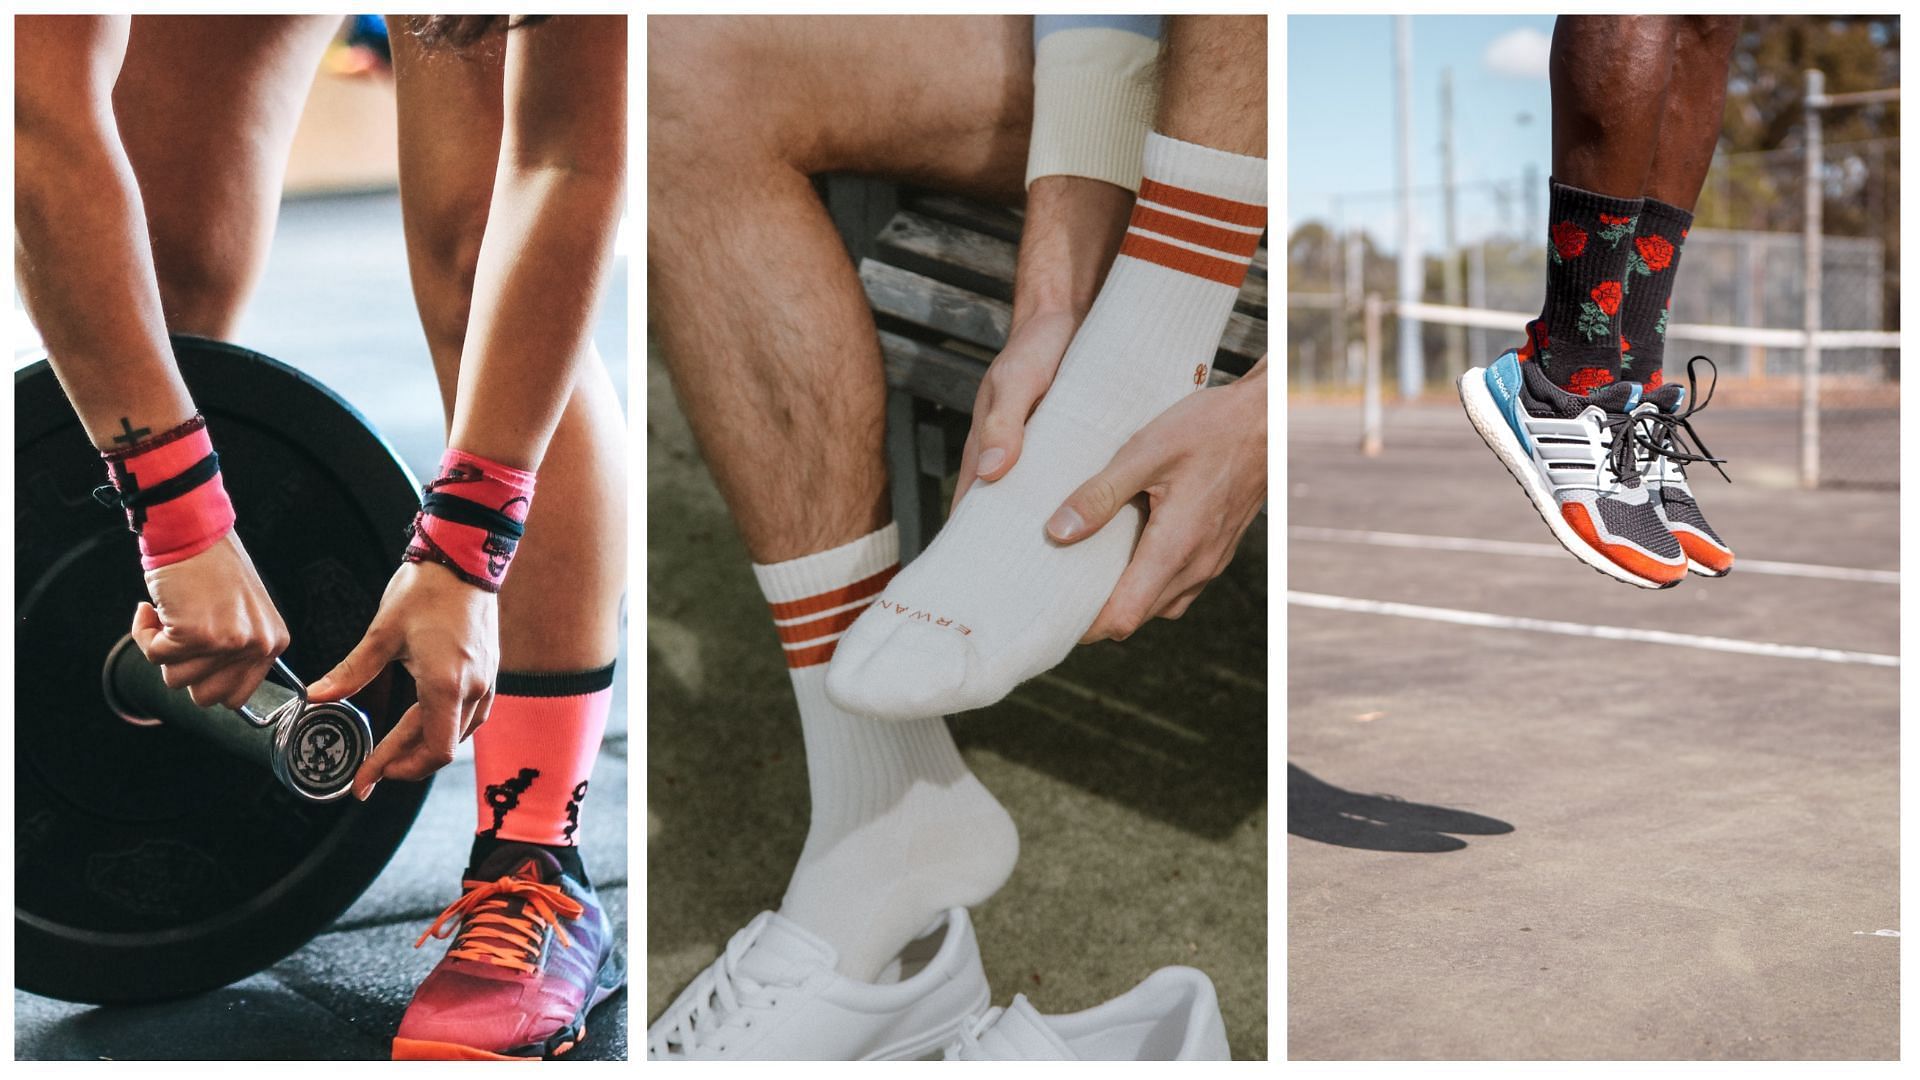 5 Best Workout Socks For Men To Prevent Blisters In The Gym